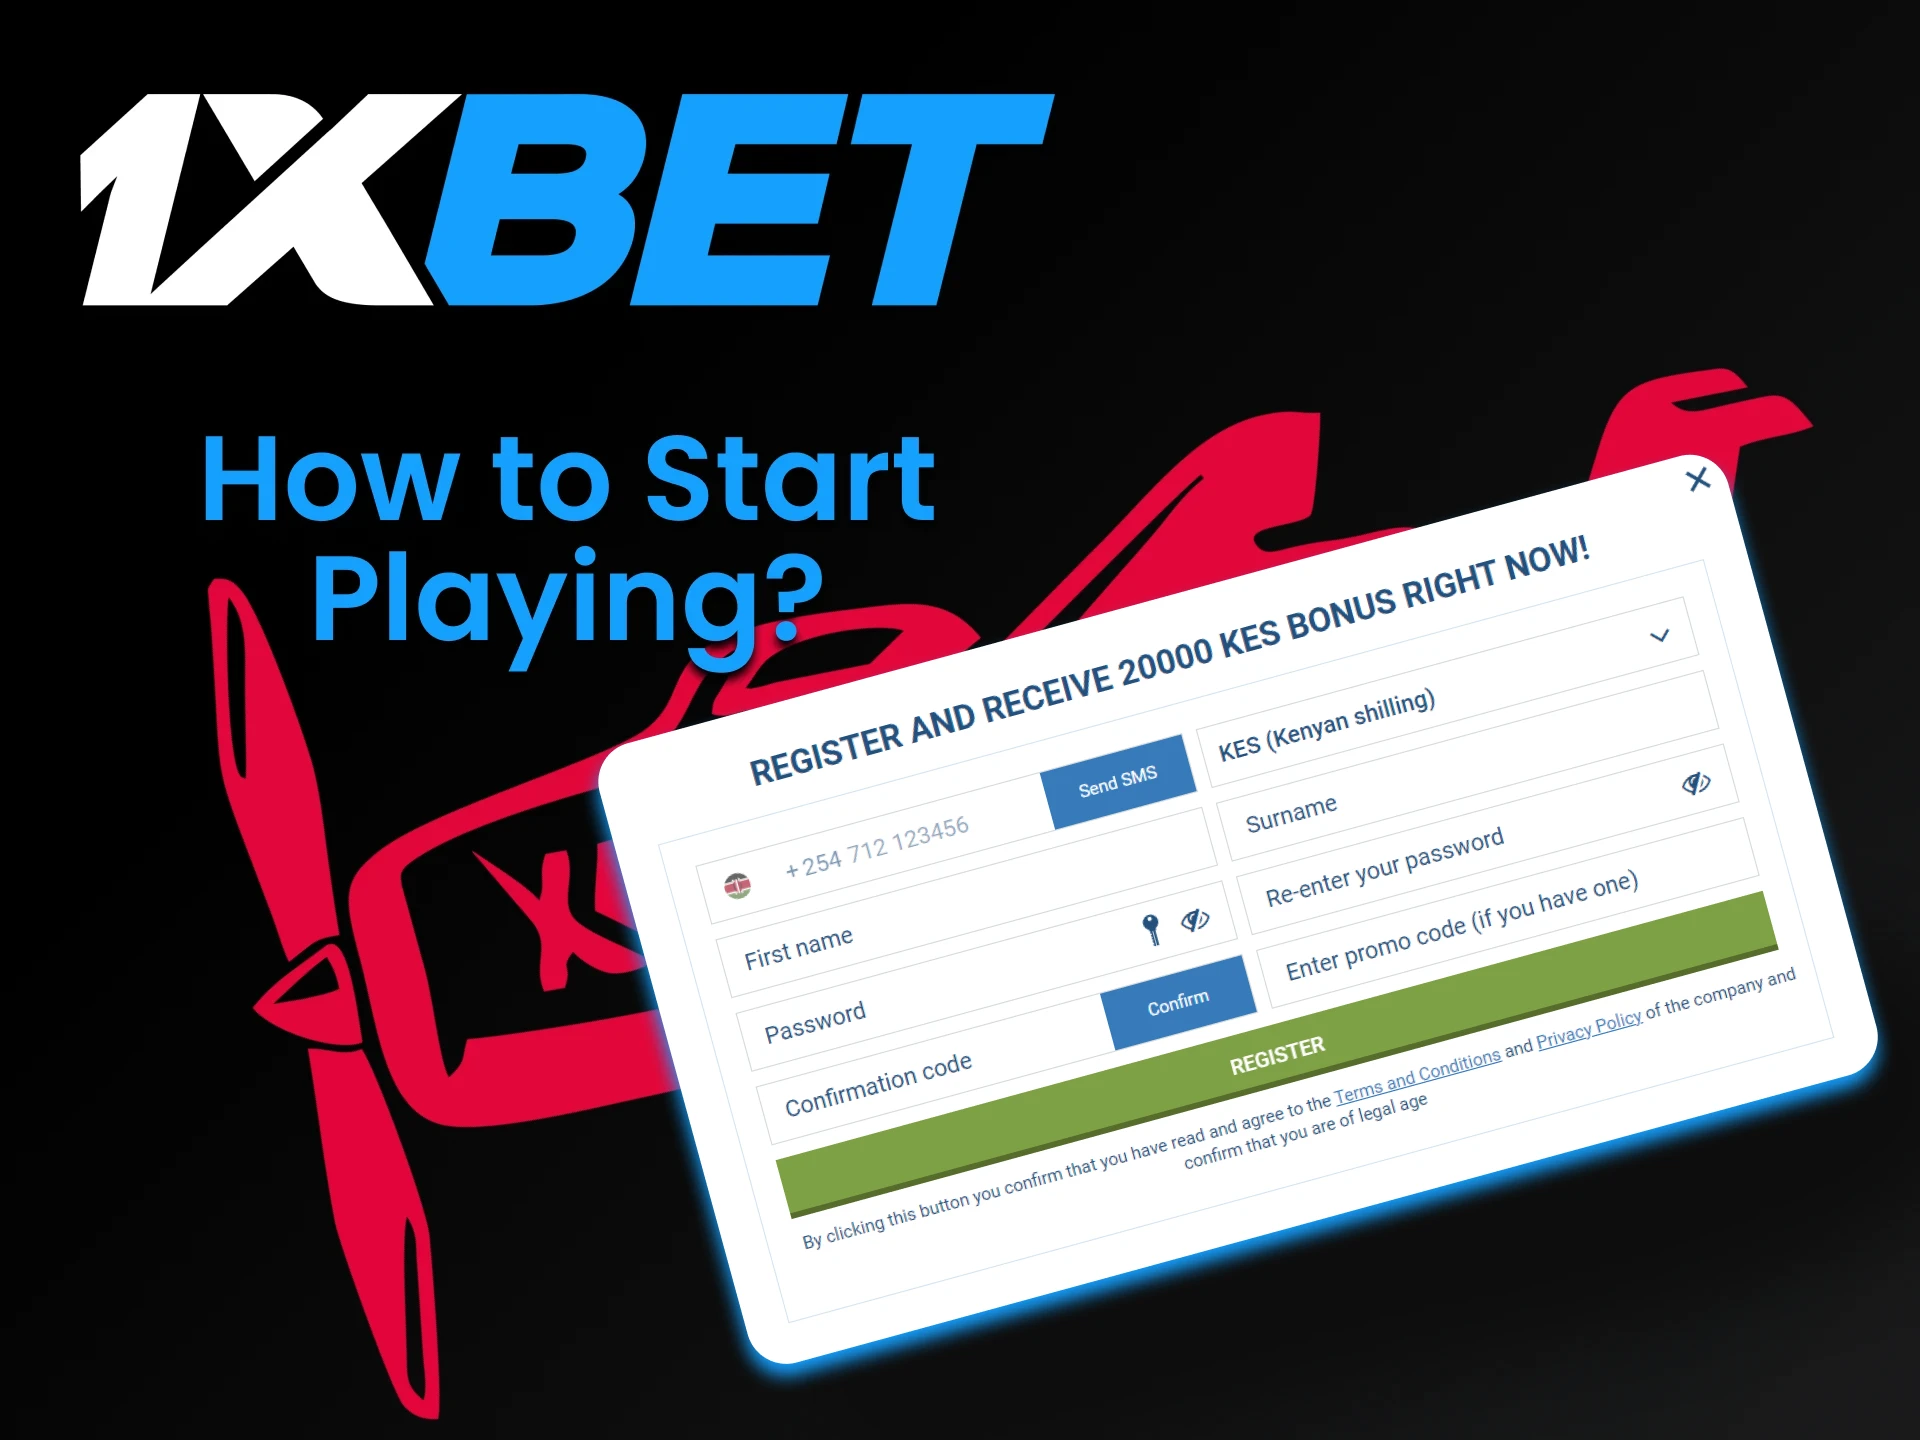 It is easy and simple to start playing the Aviator game at 1xbet.